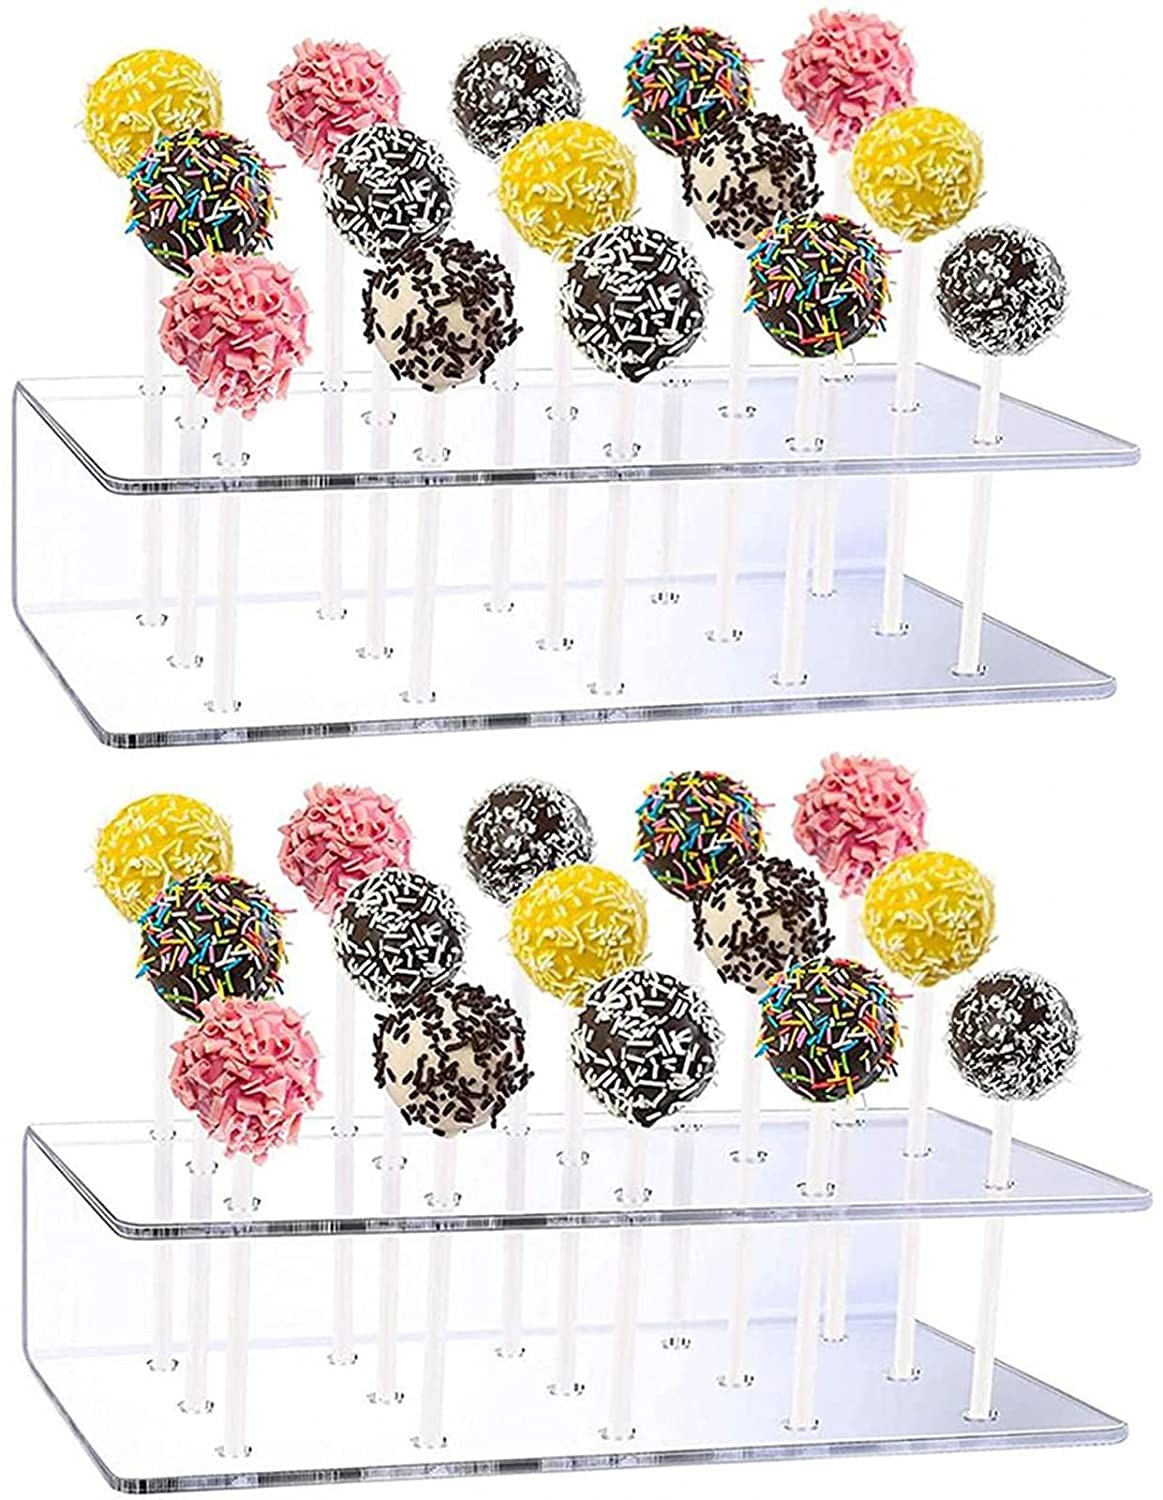  Wedding Birthday Acrylic Lollipop Stands 1.2cm3 For Donut Candy Ice Cream Manufactures